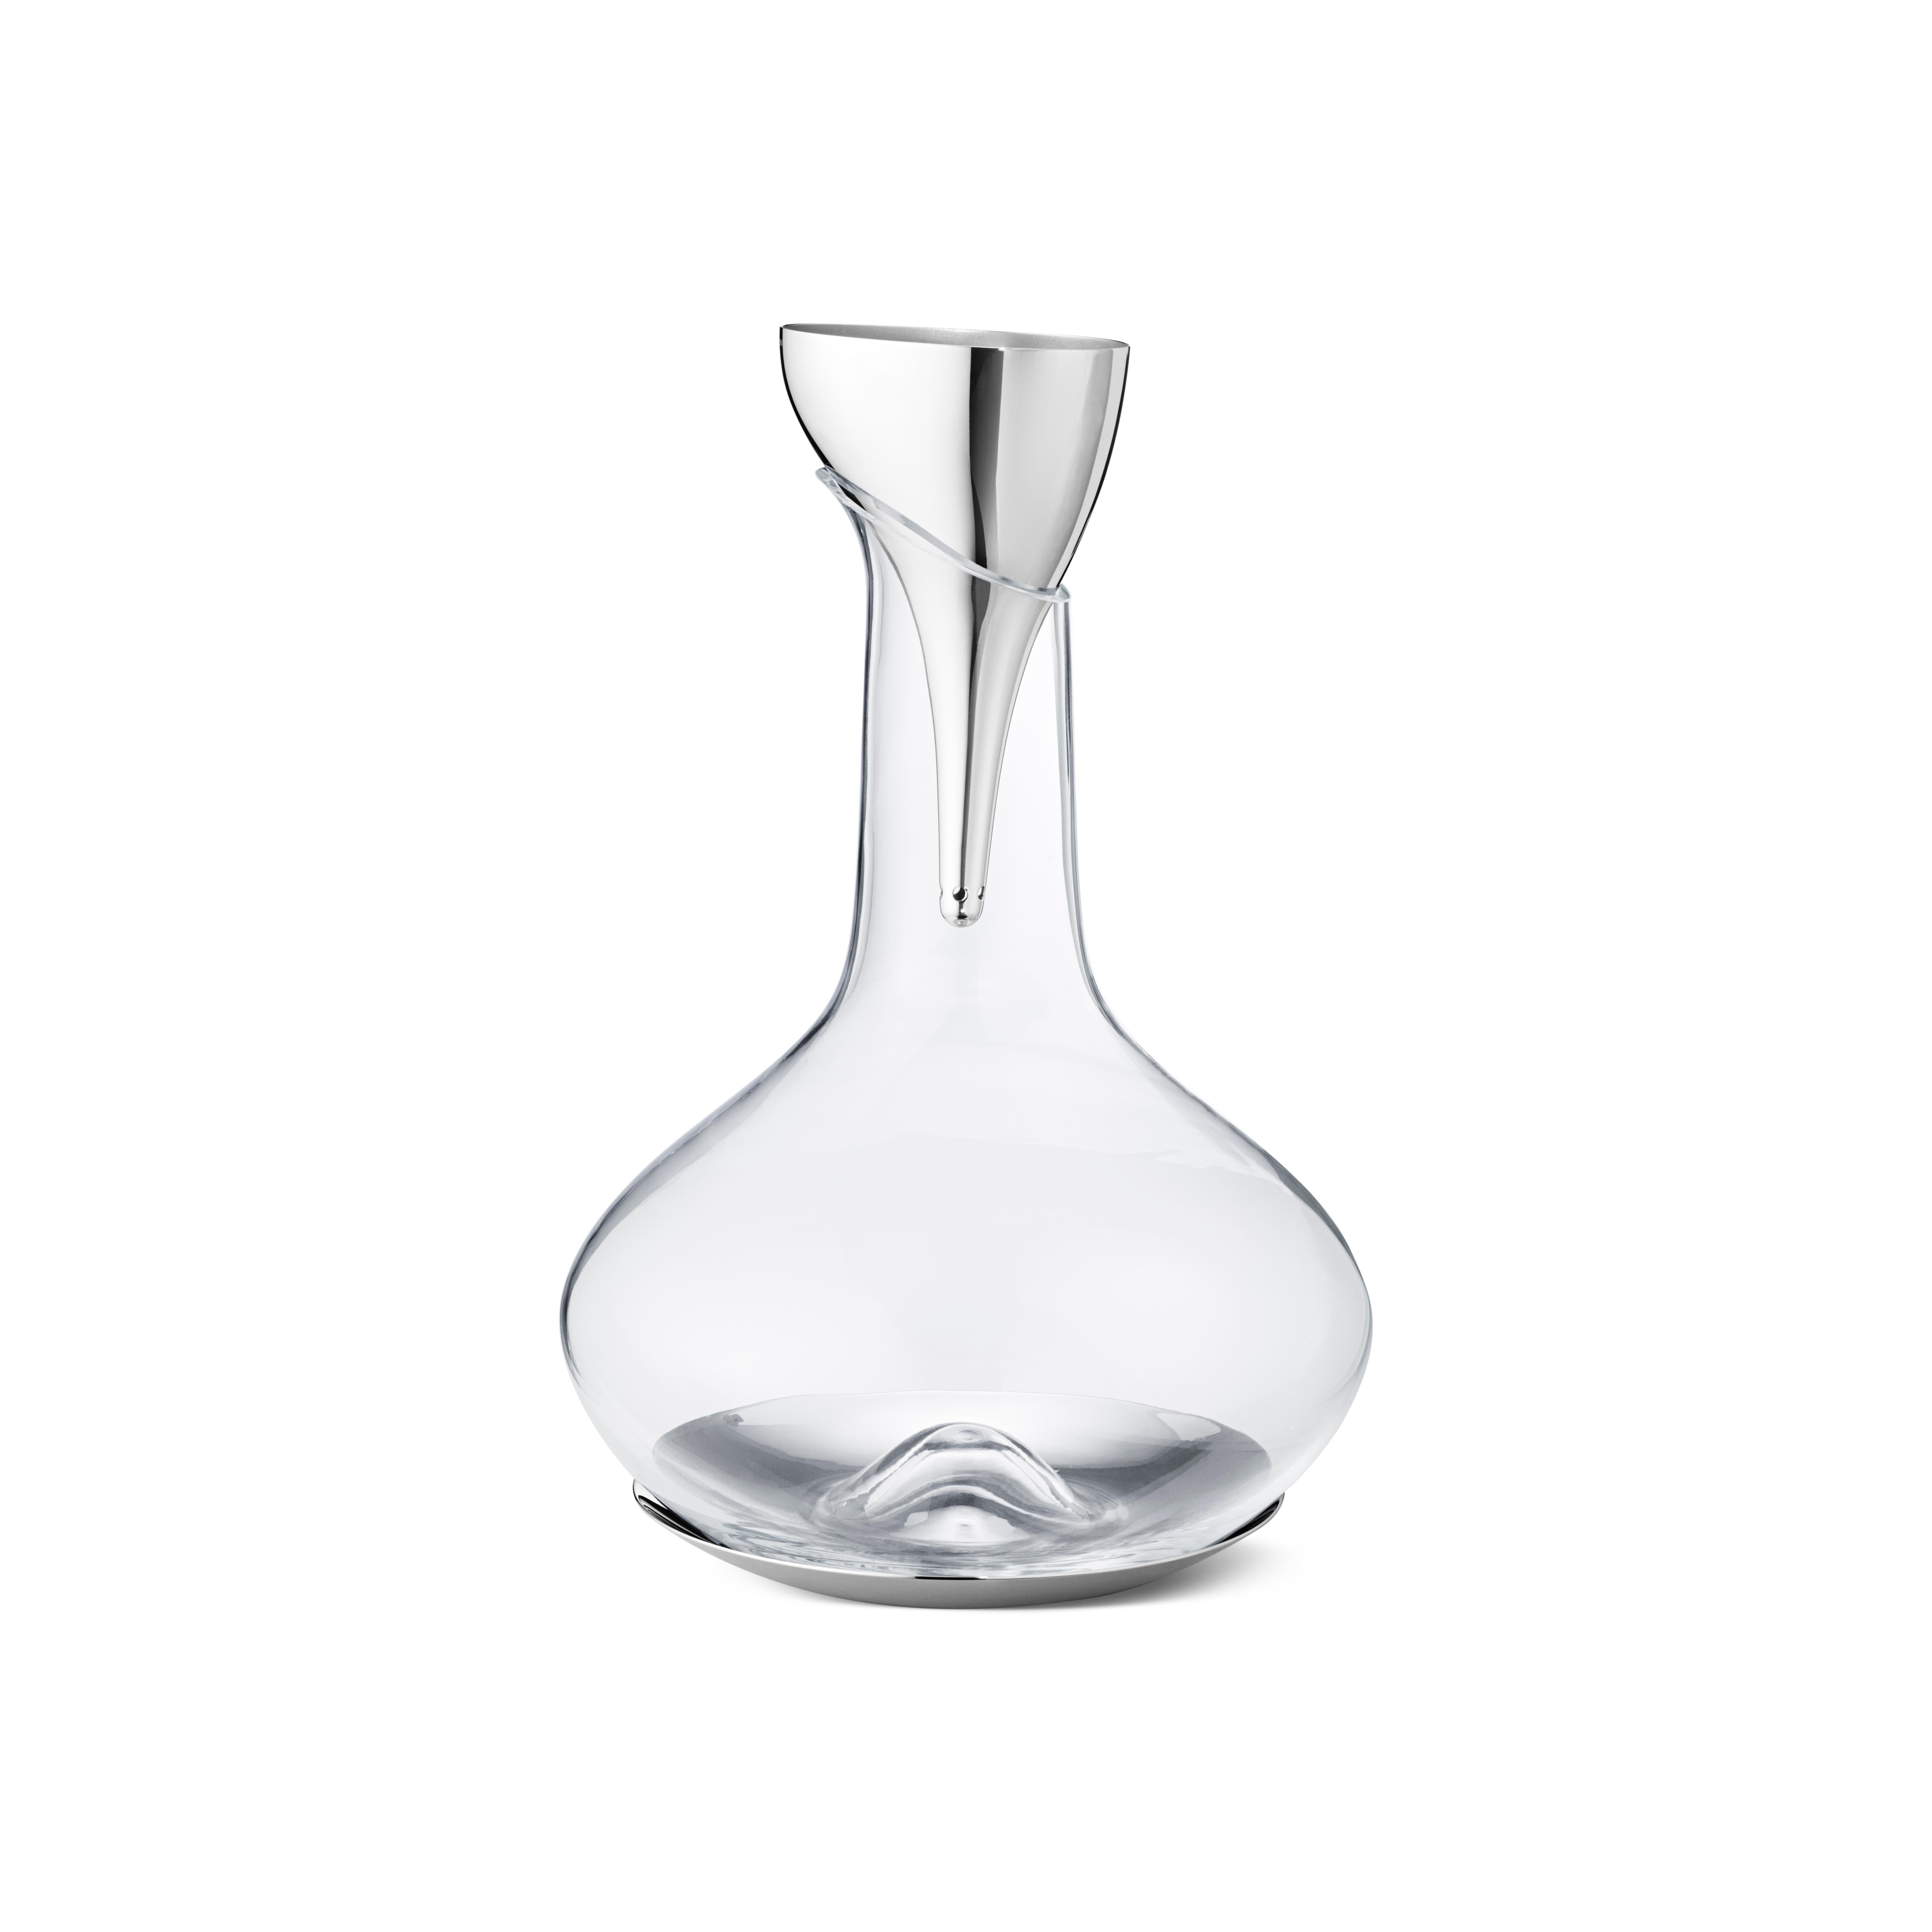 Attention to the finer details is a telling sign of a great host and using an aerator can enhance both the presentation and overall quality of wine. Use this stylish funnel to transfer the wine from bottle to decanter and bring a whole new beauty to